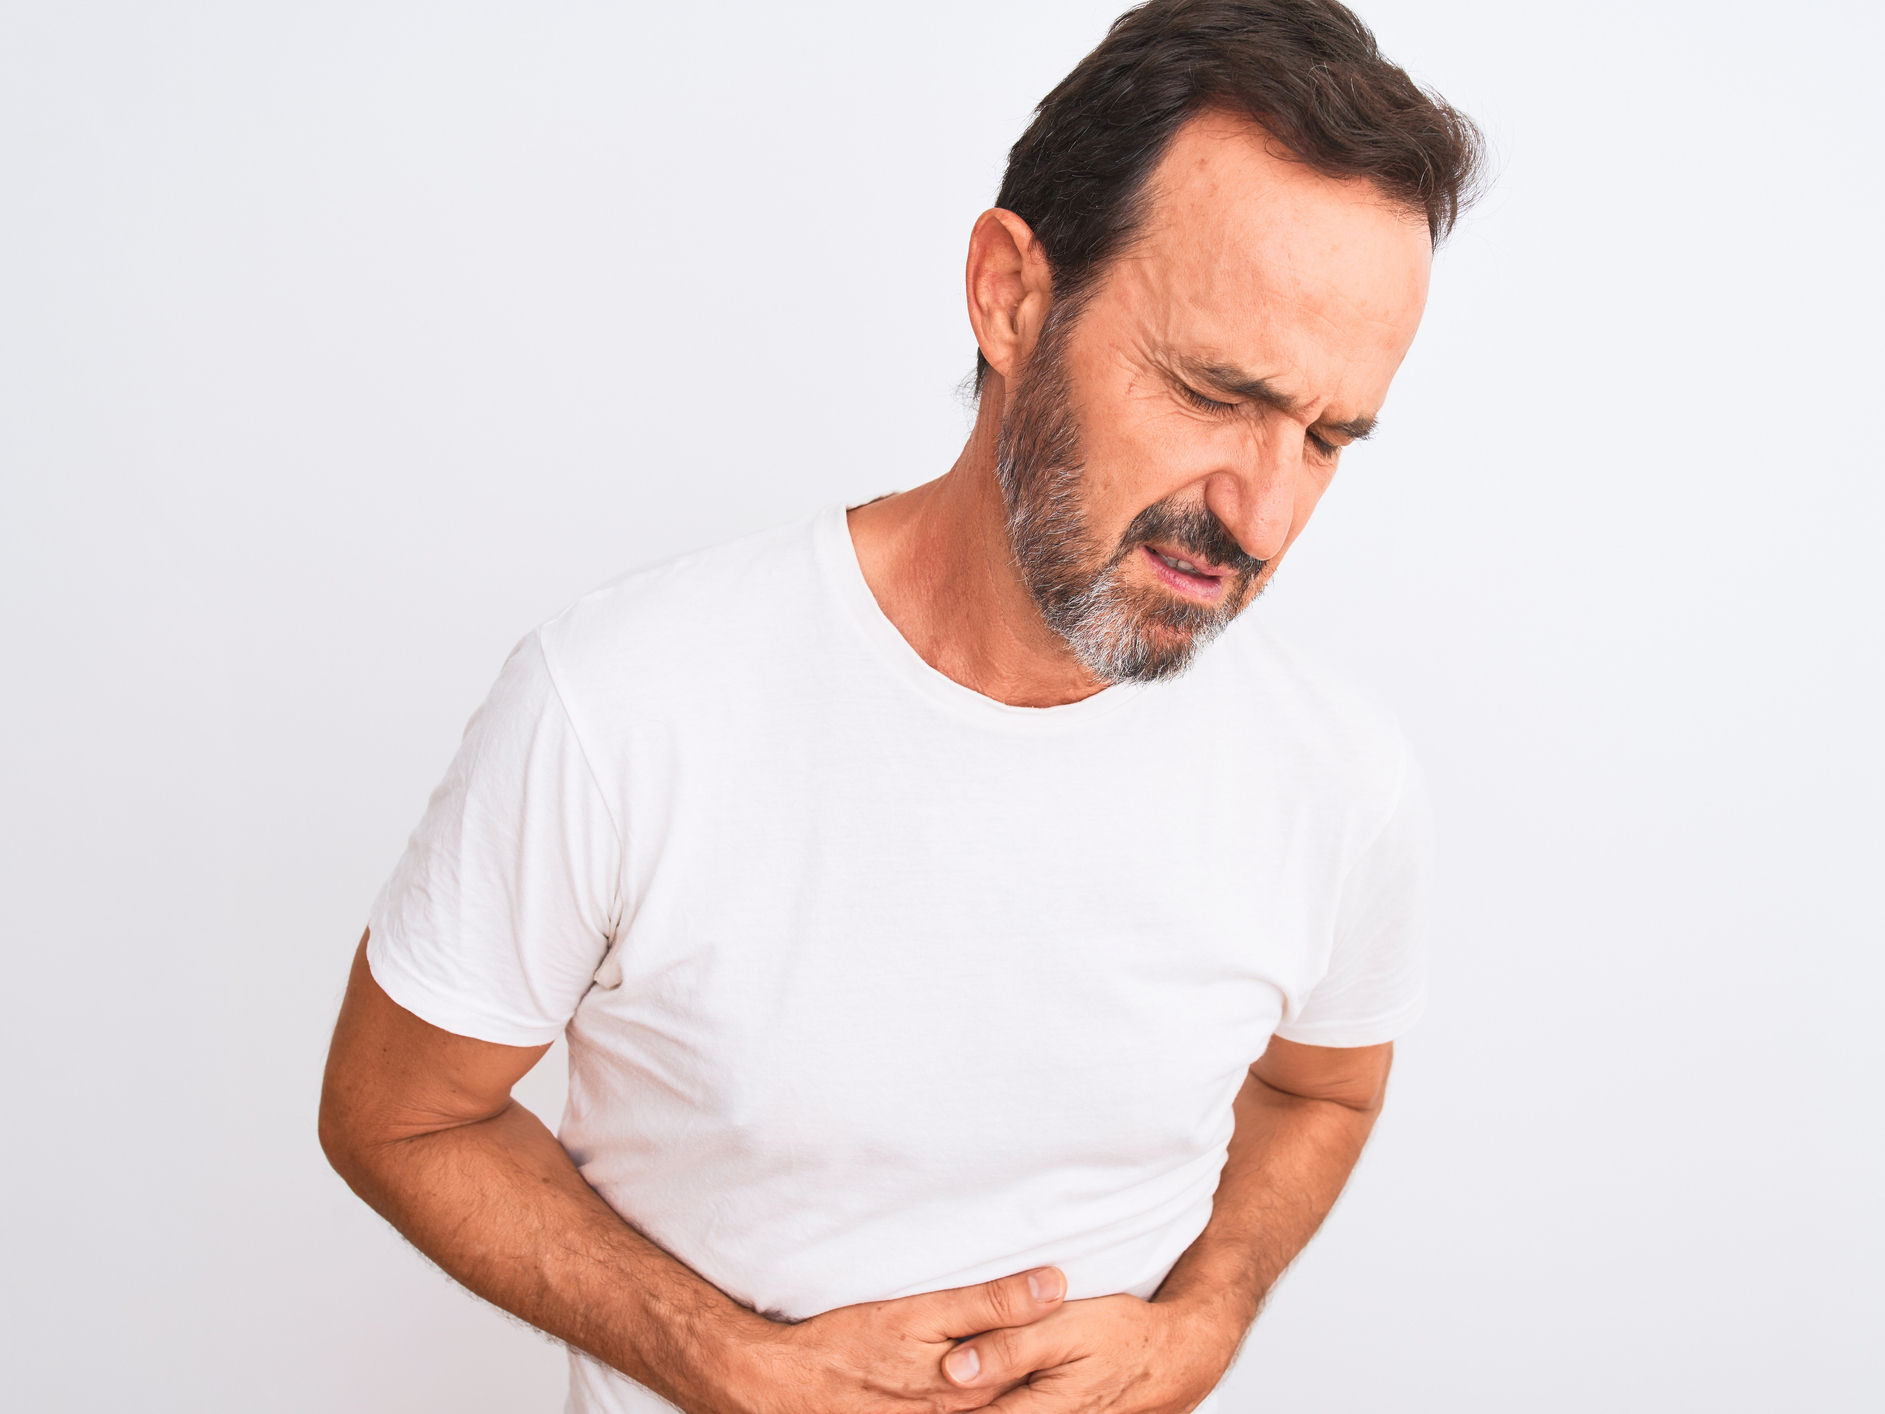 The common gut infection that leads to long-term tummy trouble